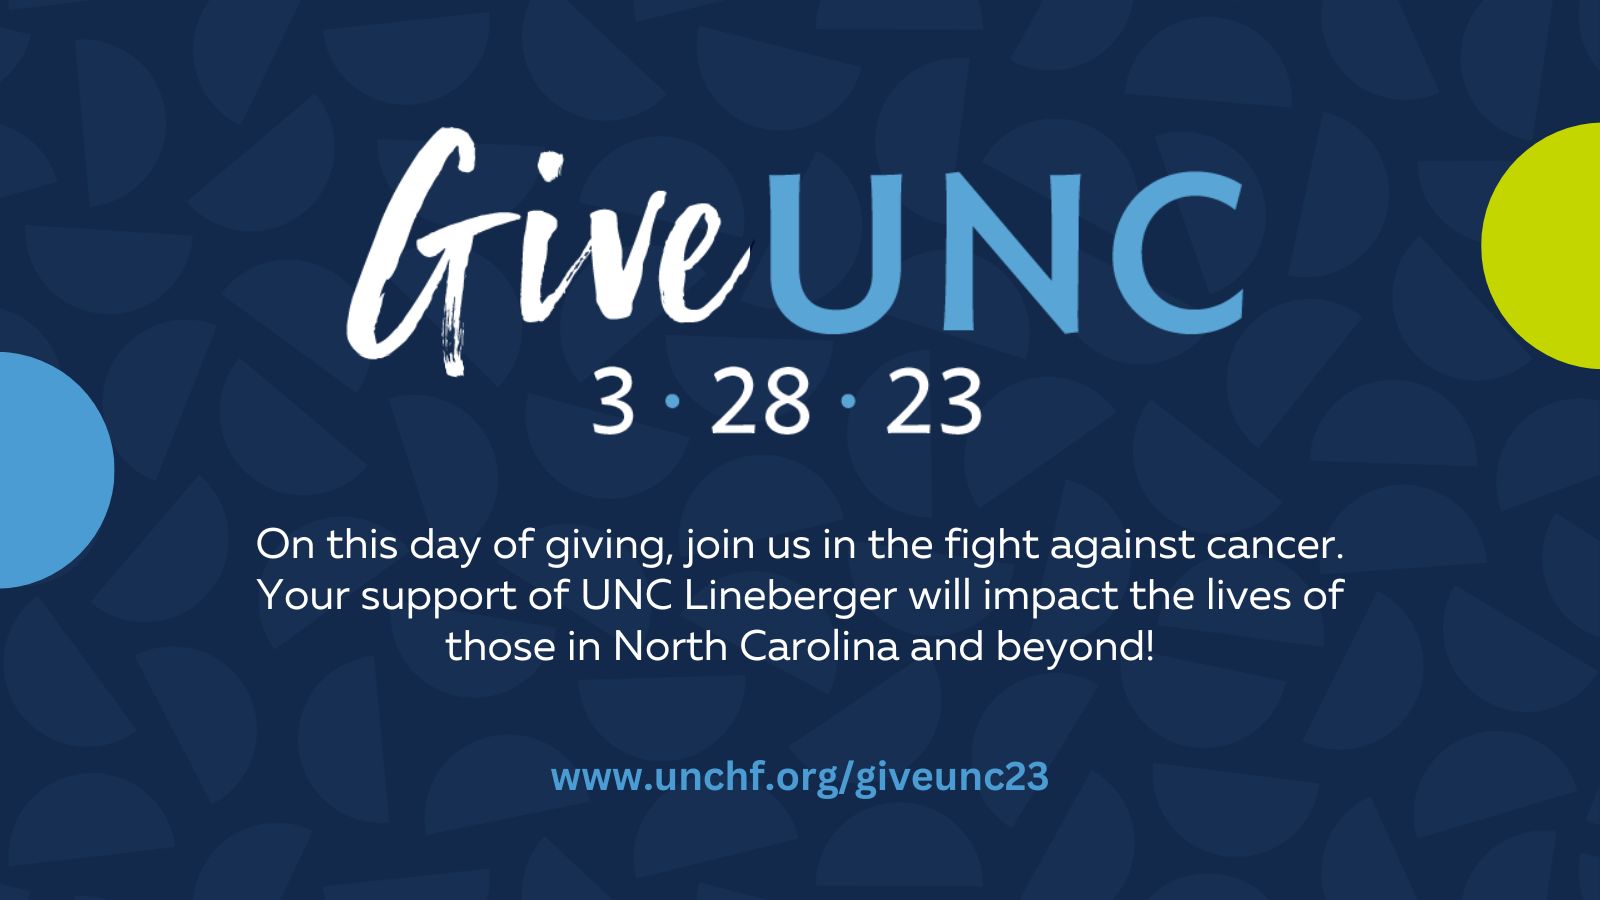 Today is GiveUNC